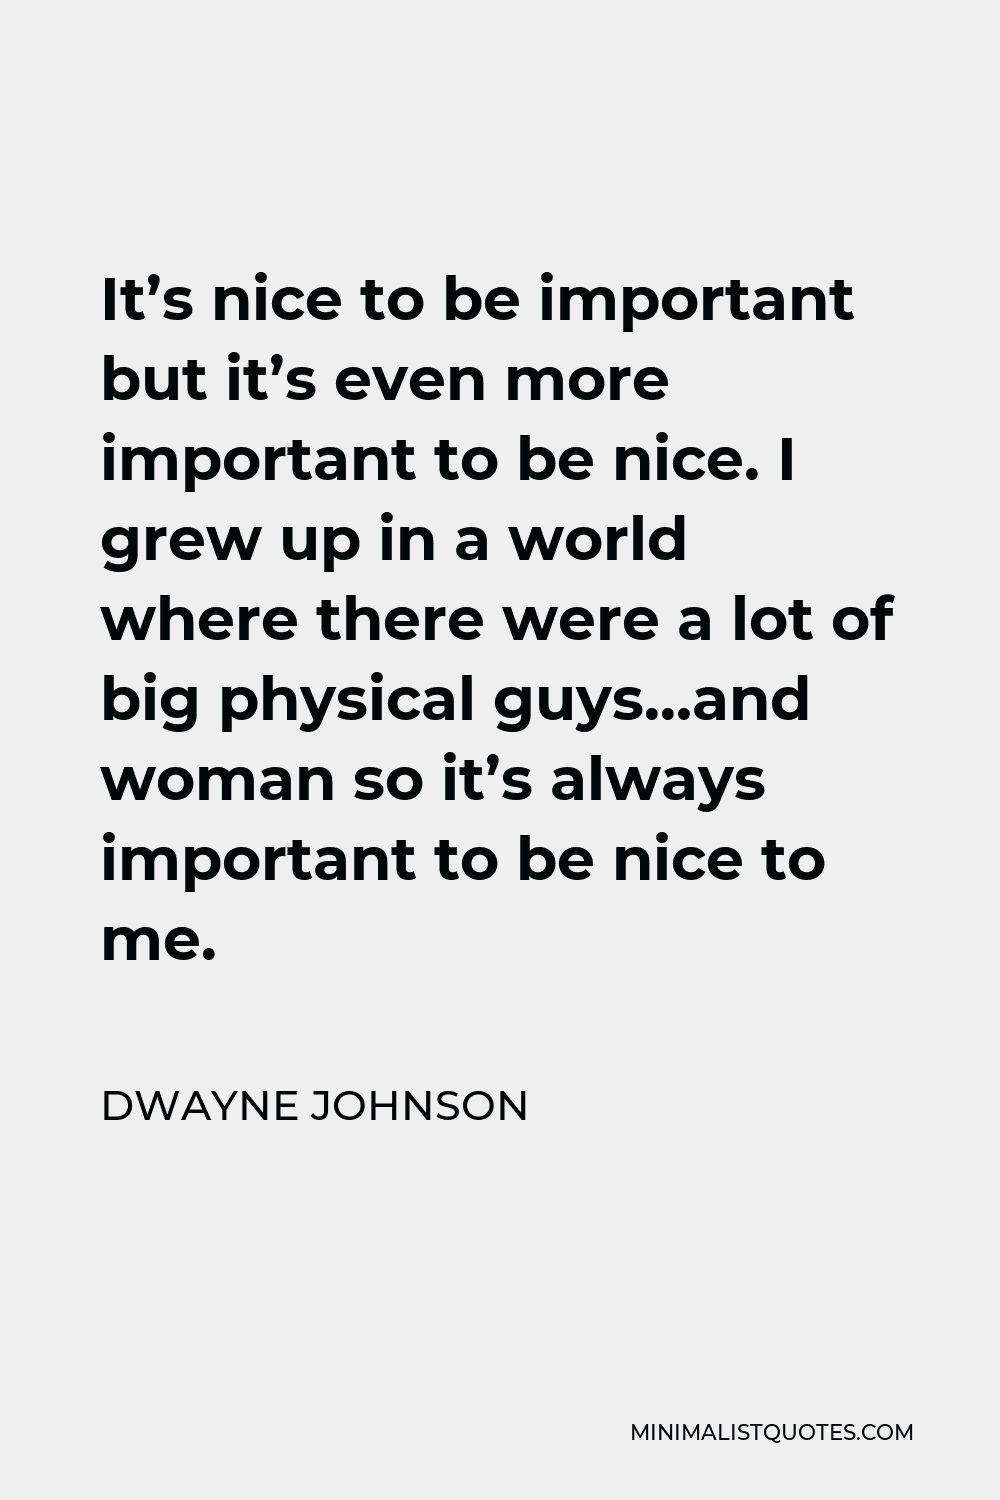 Dwayne Johnson Quote - It’s nice to be important but it’s even more important to be nice. I grew up in a world where there were a lot of big physical guys…and woman so it’s always important to be nice to me.